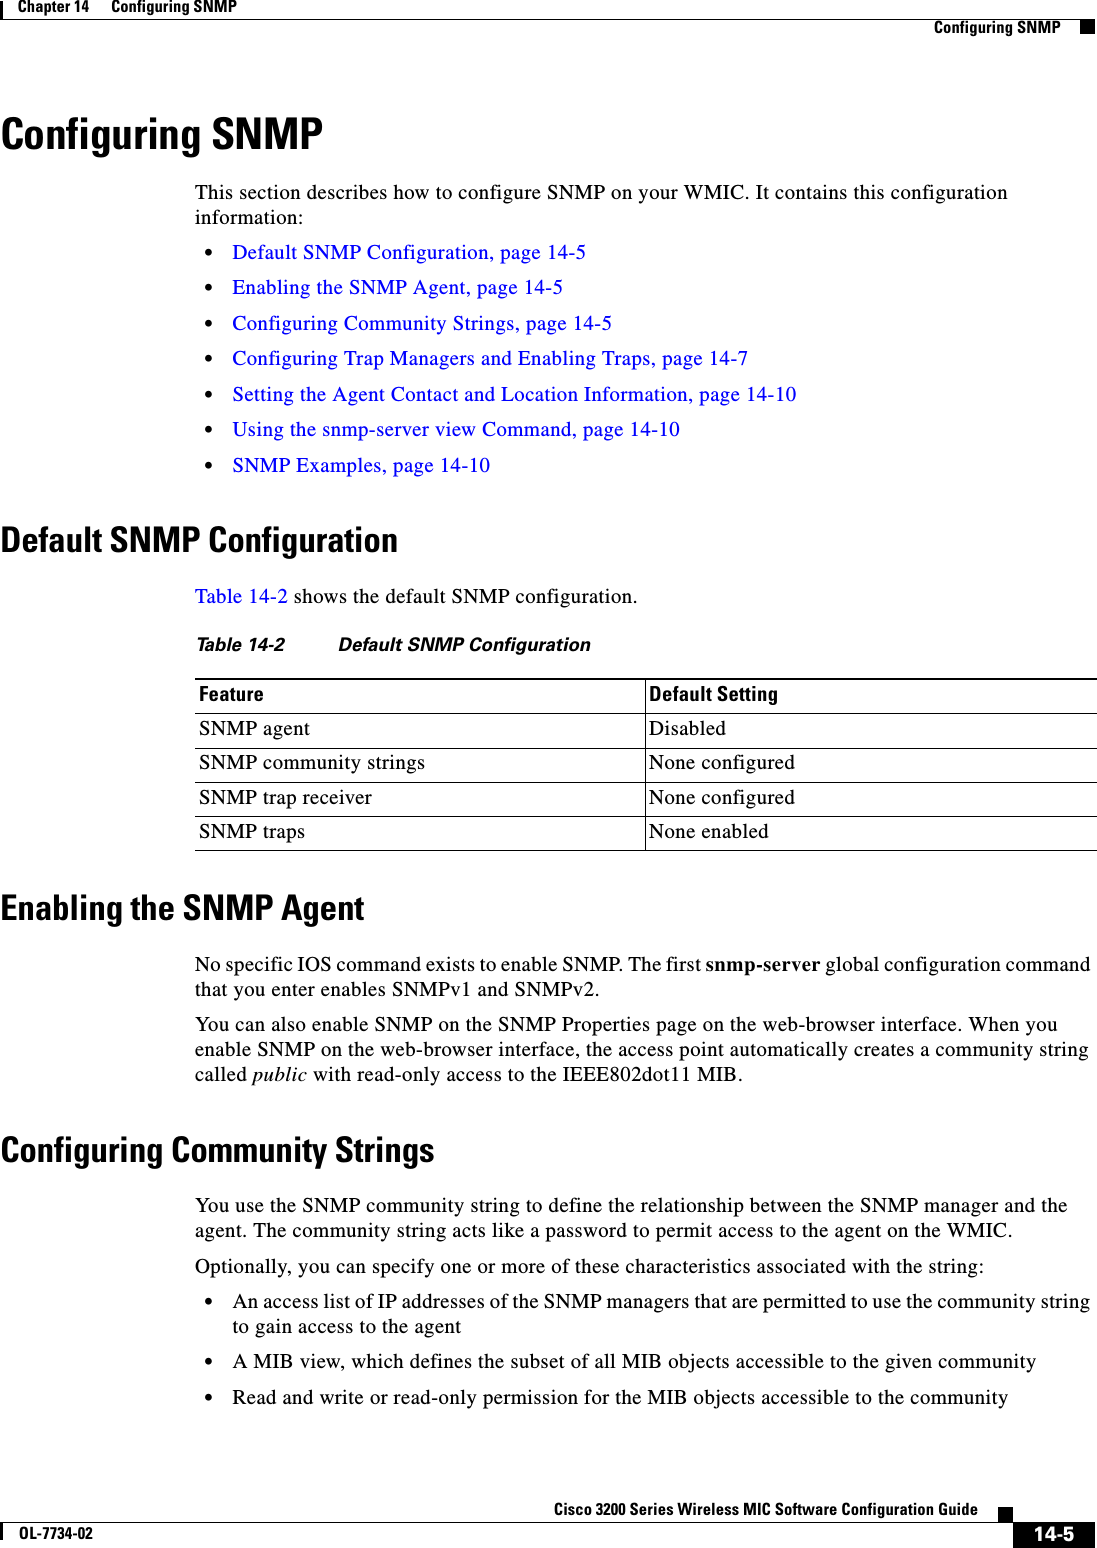 14-5Cisco 3200 Series Wireless MIC Software Configuration GuideOL-7734-02Chapter 14      Configuring SNMPConfiguring SNMPConfiguring SNMPThis section describes how to configure SNMP on your WMIC. It contains this configuration information:•Default SNMP Configuration, page 14-5•Enabling the SNMP Agent, page 14-5•Configuring Community Strings, page 14-5•Configuring Trap Managers and Enabling Traps, page 14-7•Setting the Agent Contact and Location Information, page 14-10•Using the snmp-server view Command, page 14-10•SNMP Examples, page 14-10Default SNMP ConfigurationTable 14-2 shows the default SNMP configuration.Enabling the SNMP AgentNo specific IOS command exists to enable SNMP. The first snmp-server global configuration command that you enter enables SNMPv1 and SNMPv2.You can also enable SNMP on the SNMP Properties page on the web-browser interface. When you enable SNMP on the web-browser interface, the access point automatically creates a community string called public with read-only access to the IEEE802dot11 MIB.Configuring Community StringsYou use the SNMP community string to define the relationship between the SNMP manager and the agent. The community string acts like a password to permit access to the agent on the WMIC. Optionally, you can specify one or more of these characteristics associated with the string:•An access list of IP addresses of the SNMP managers that are permitted to use the community string to gain access to the agent•A MIB view, which defines the subset of all MIB objects accessible to the given community •Read and write or read-only permission for the MIB objects accessible to the communityTable 14-2 Default SNMP ConfigurationFeature Default SettingSNMP agent DisabledSNMP community strings None configuredSNMP trap receiver None configuredSNMP traps None enabled